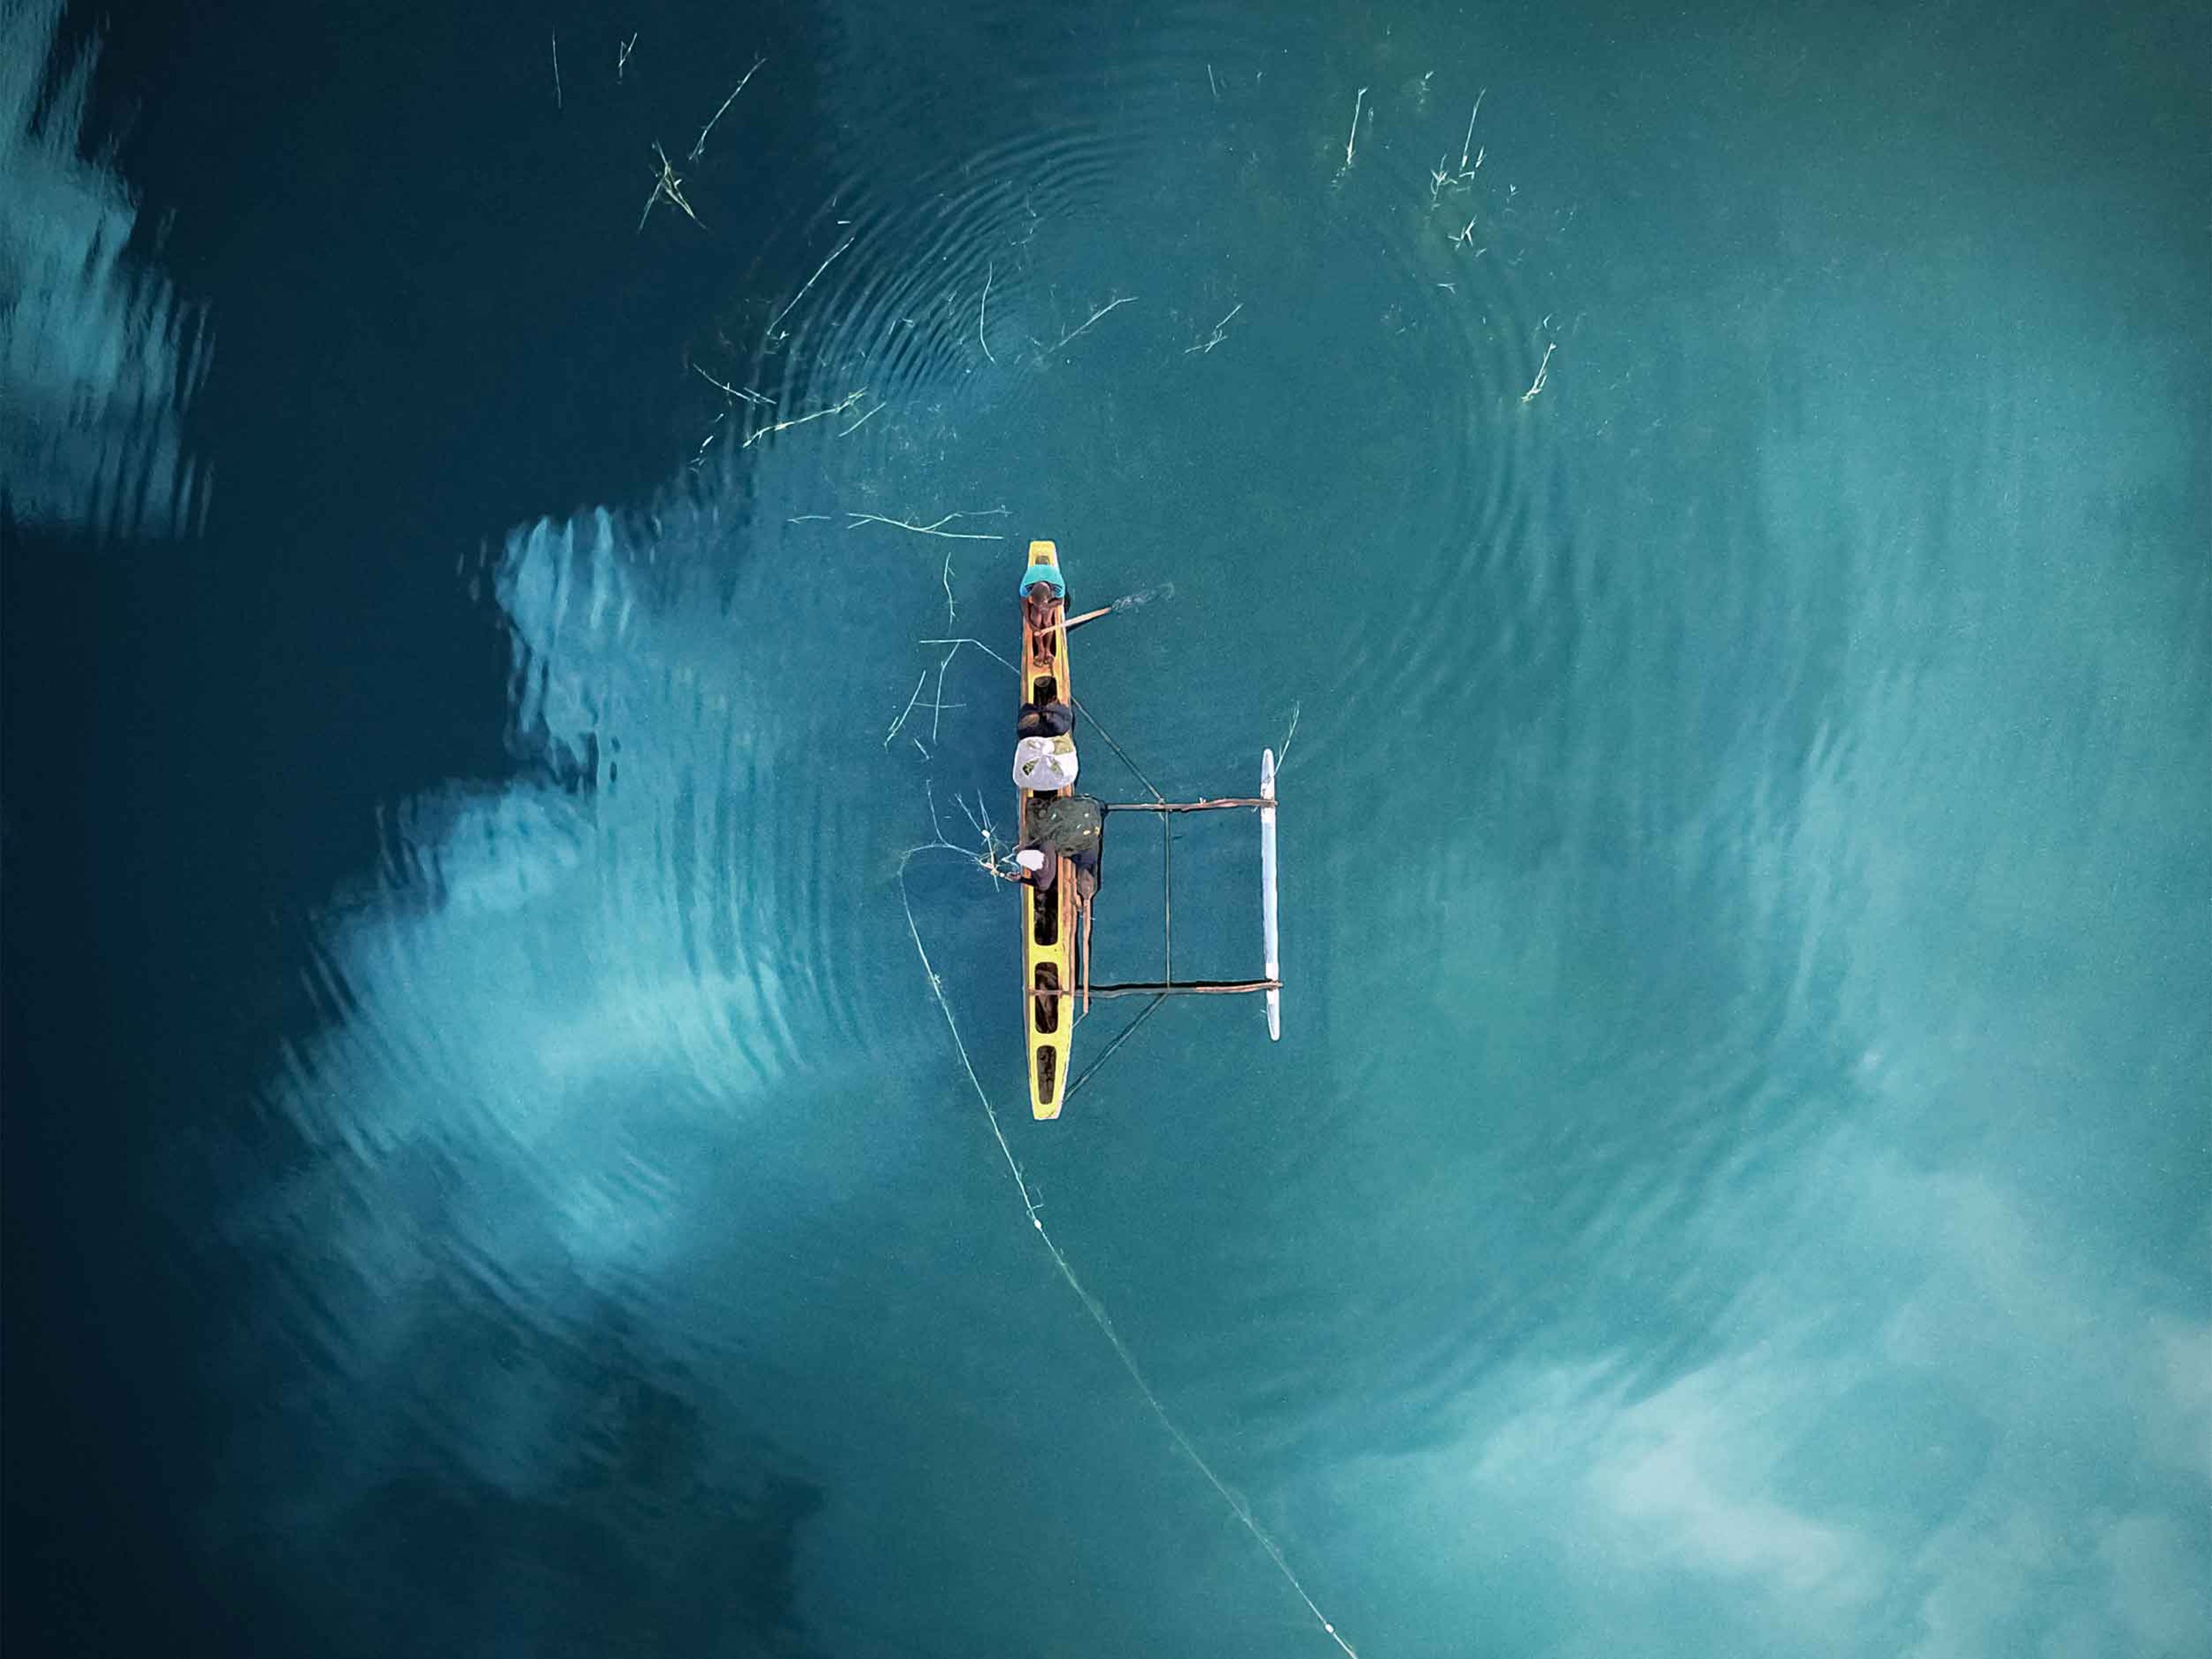 Aerial view of people fishing in traditional outrigger boat in lake with cloud reflections from above in Polonnaruwa, Sri Lanka.